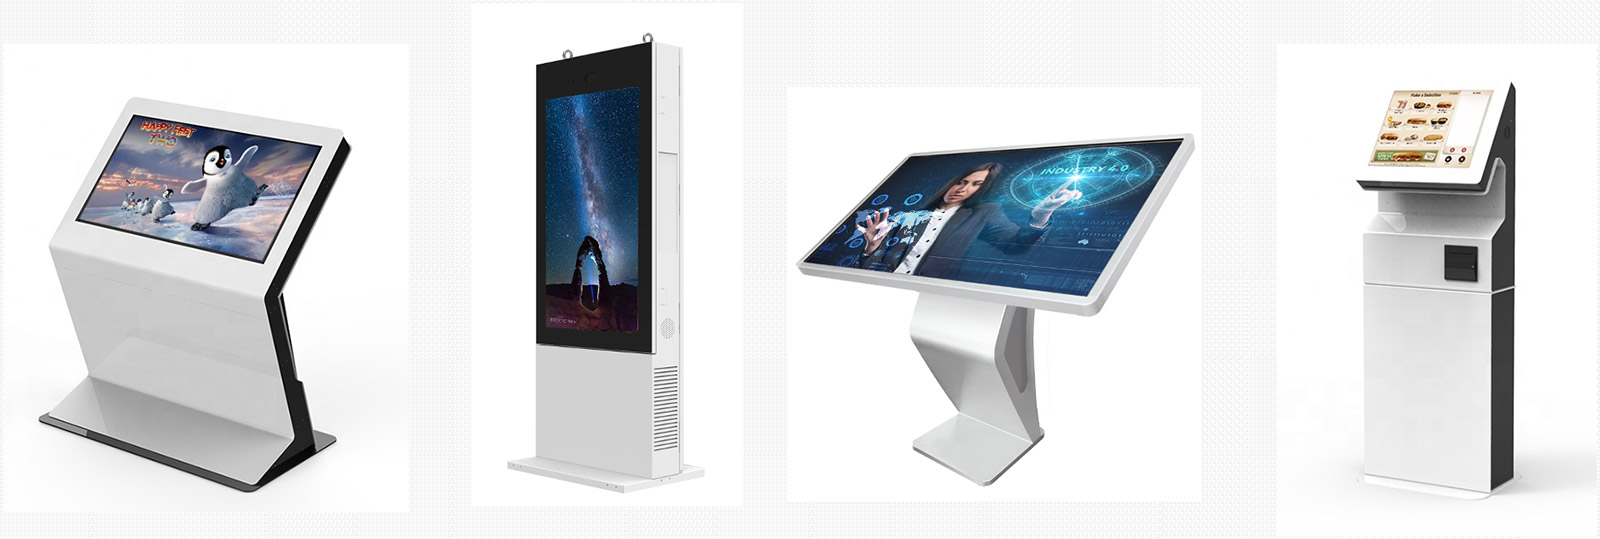 Kiosks and Large Commercial Displays